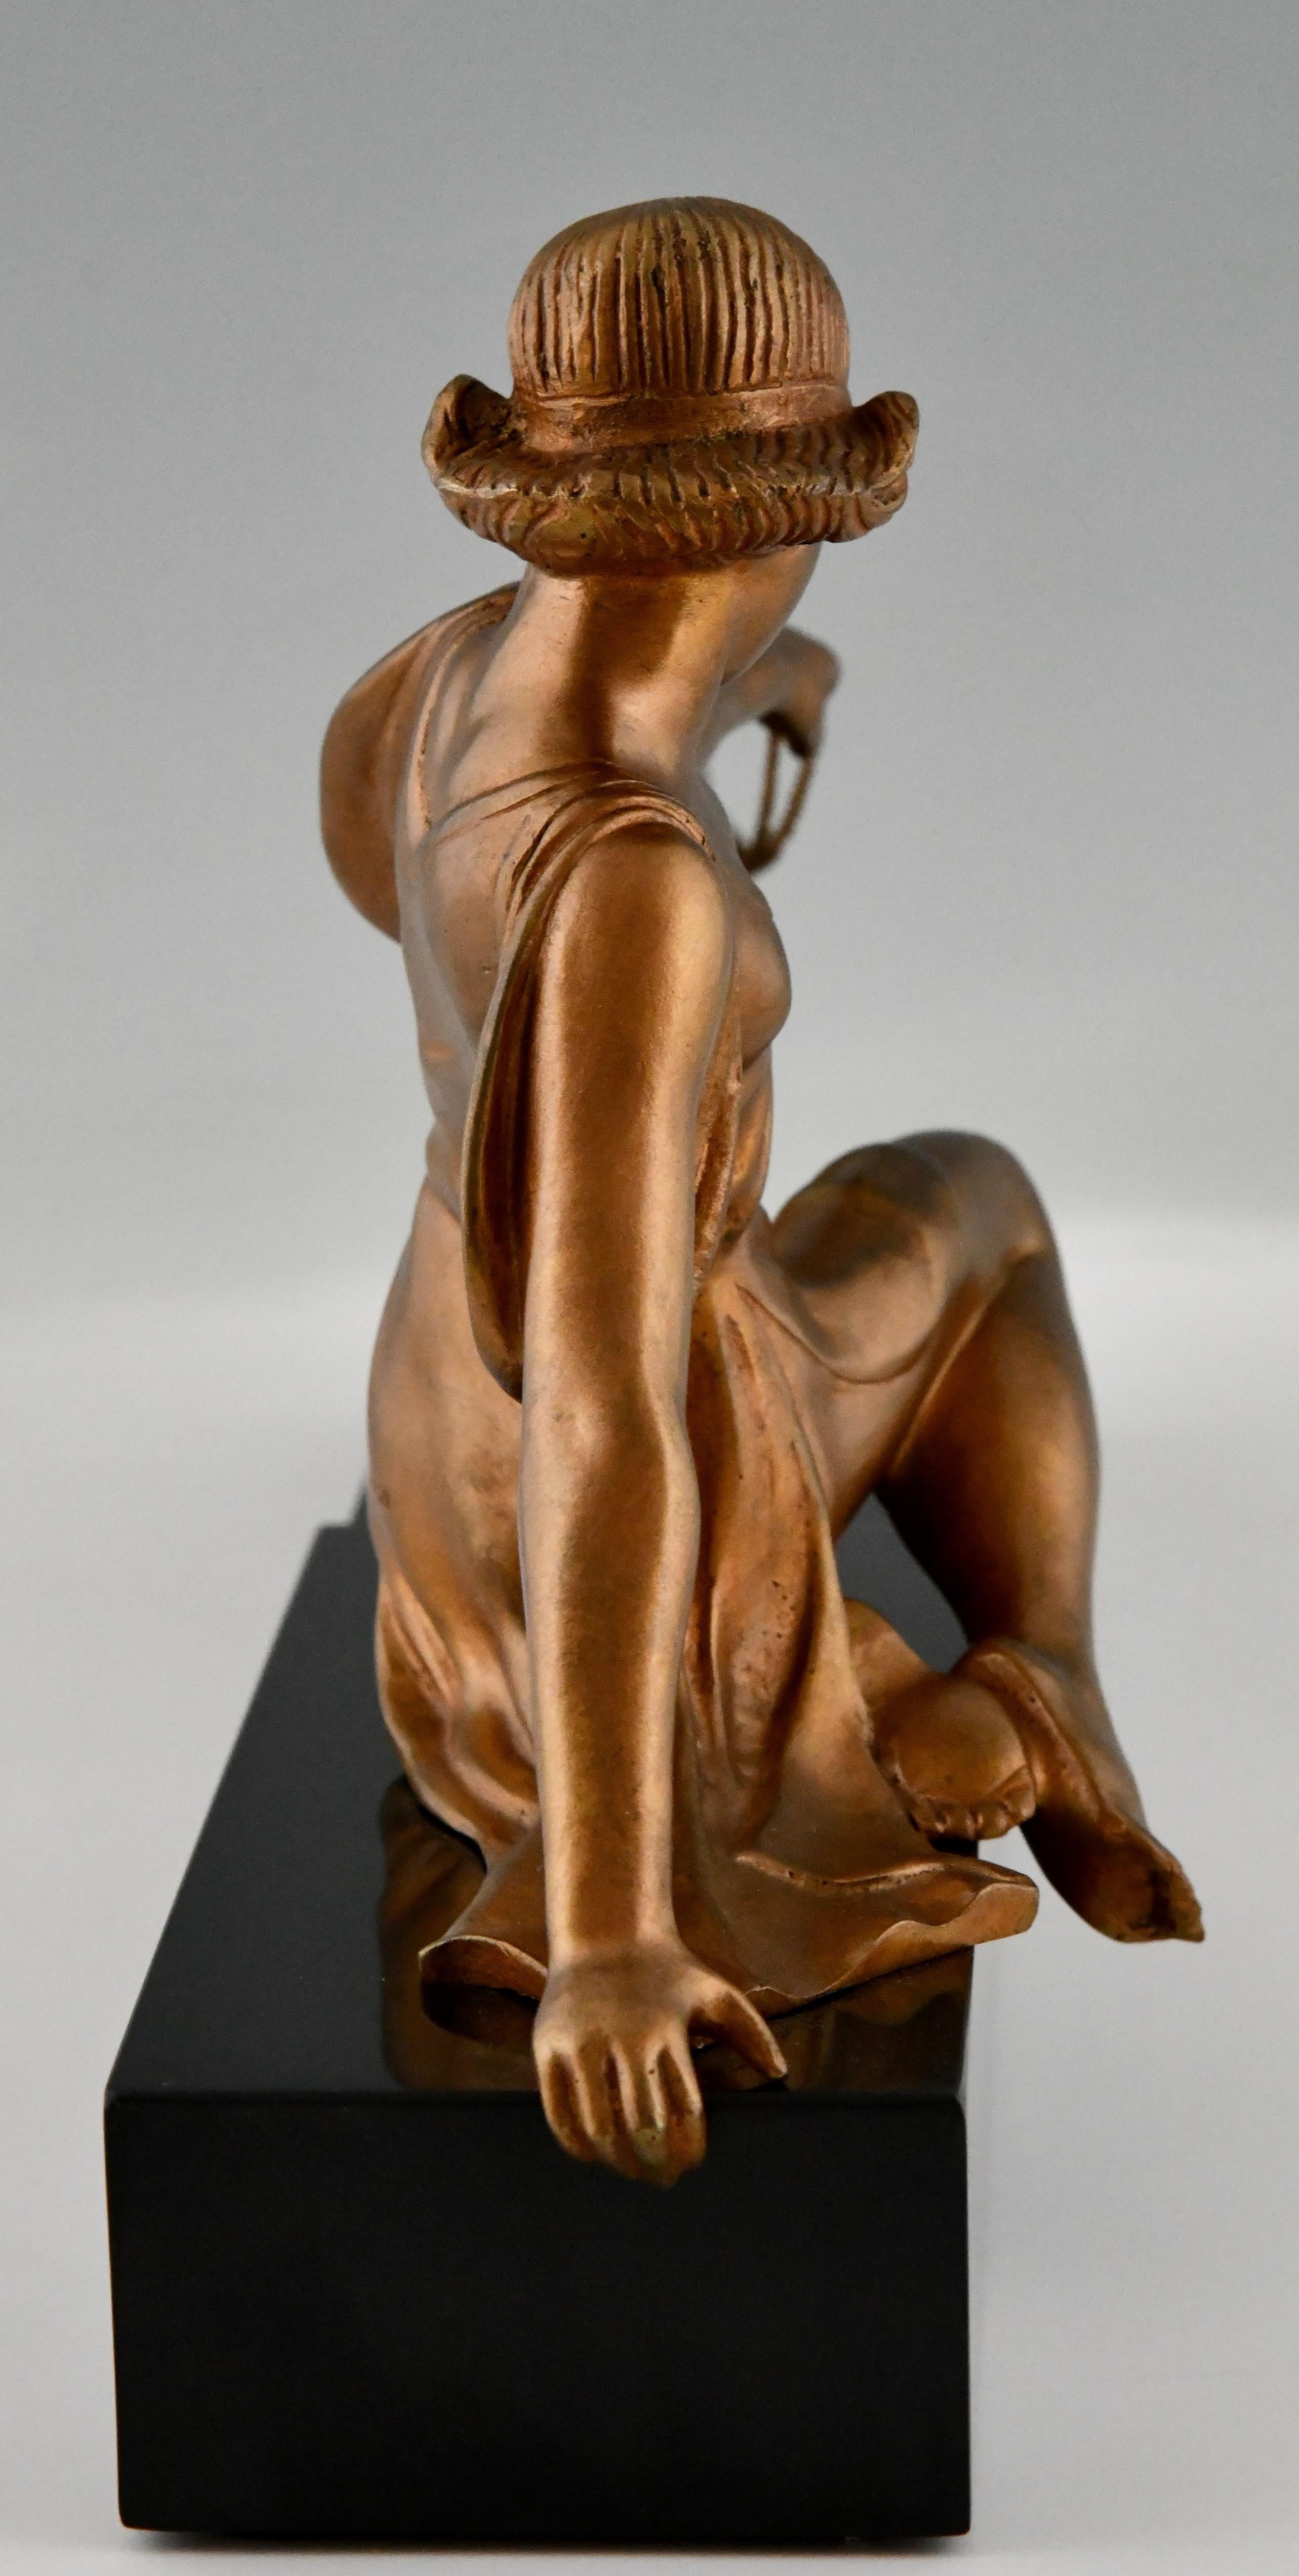 Mid-20th Century Art Deco Bronze Sculpture Lady with Greyhound Dog by Armand Godard 1930 For Sale